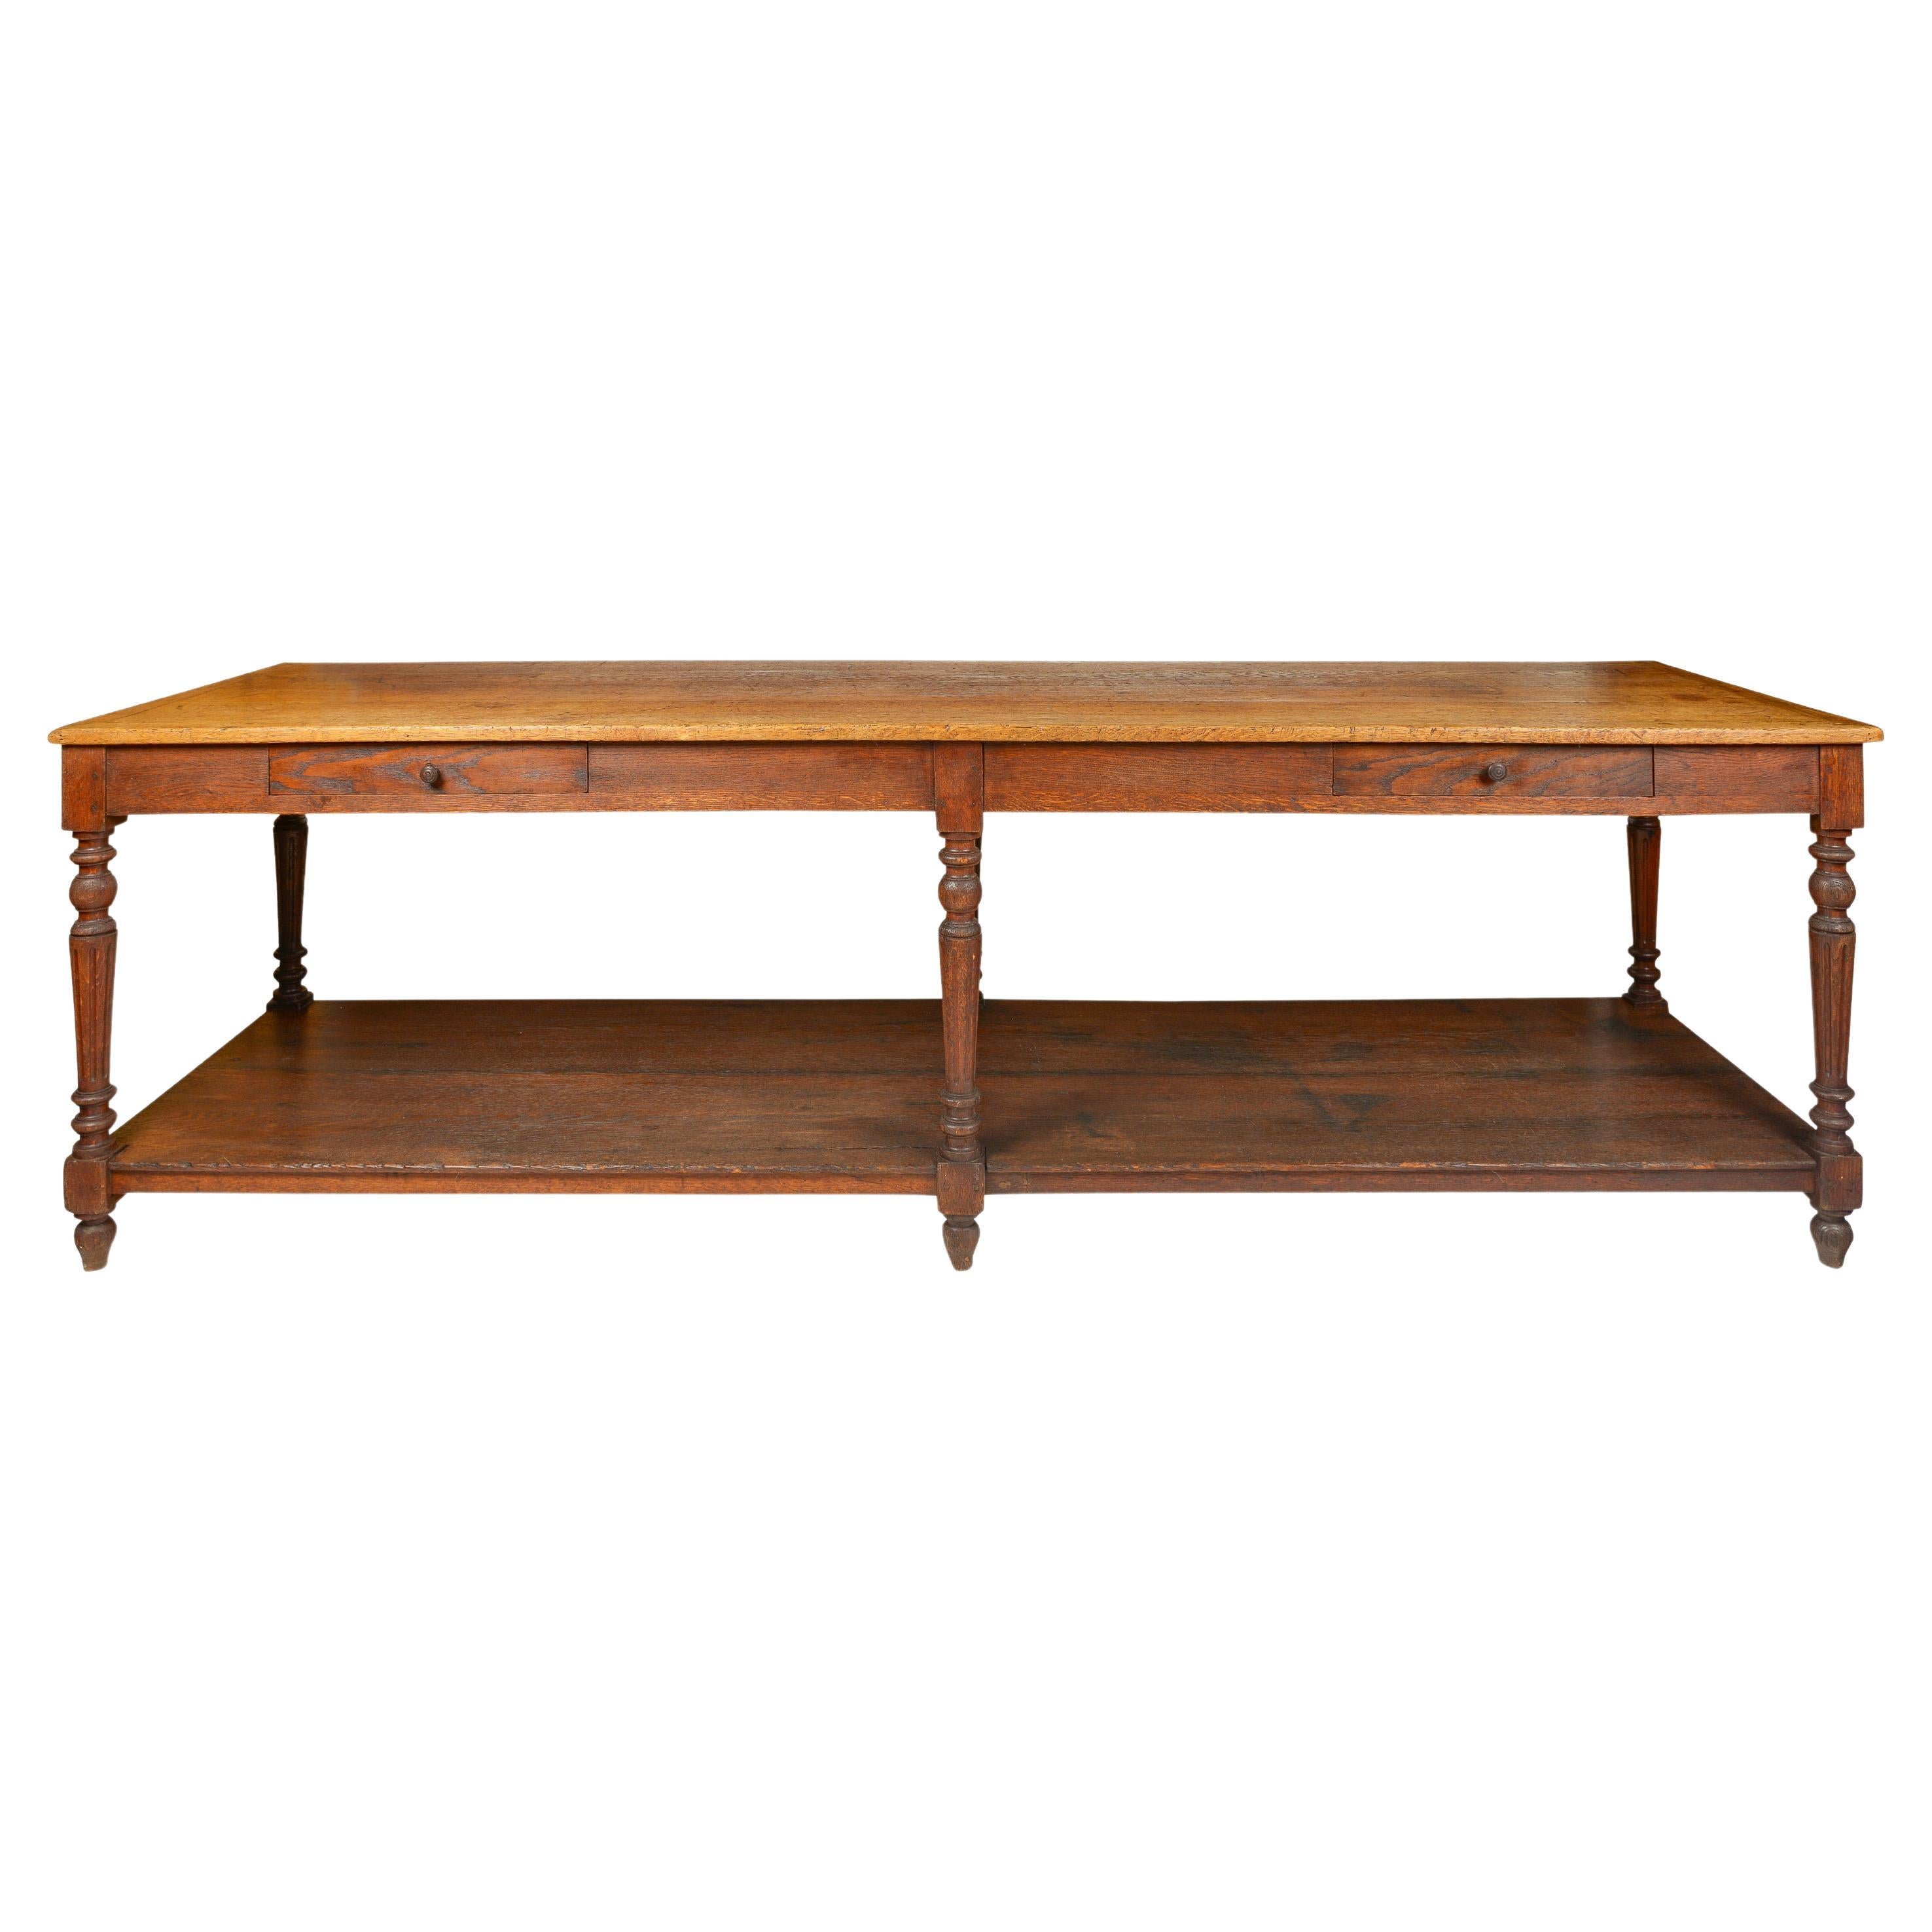 A 19th Century French Oak Draper's Table For Sale